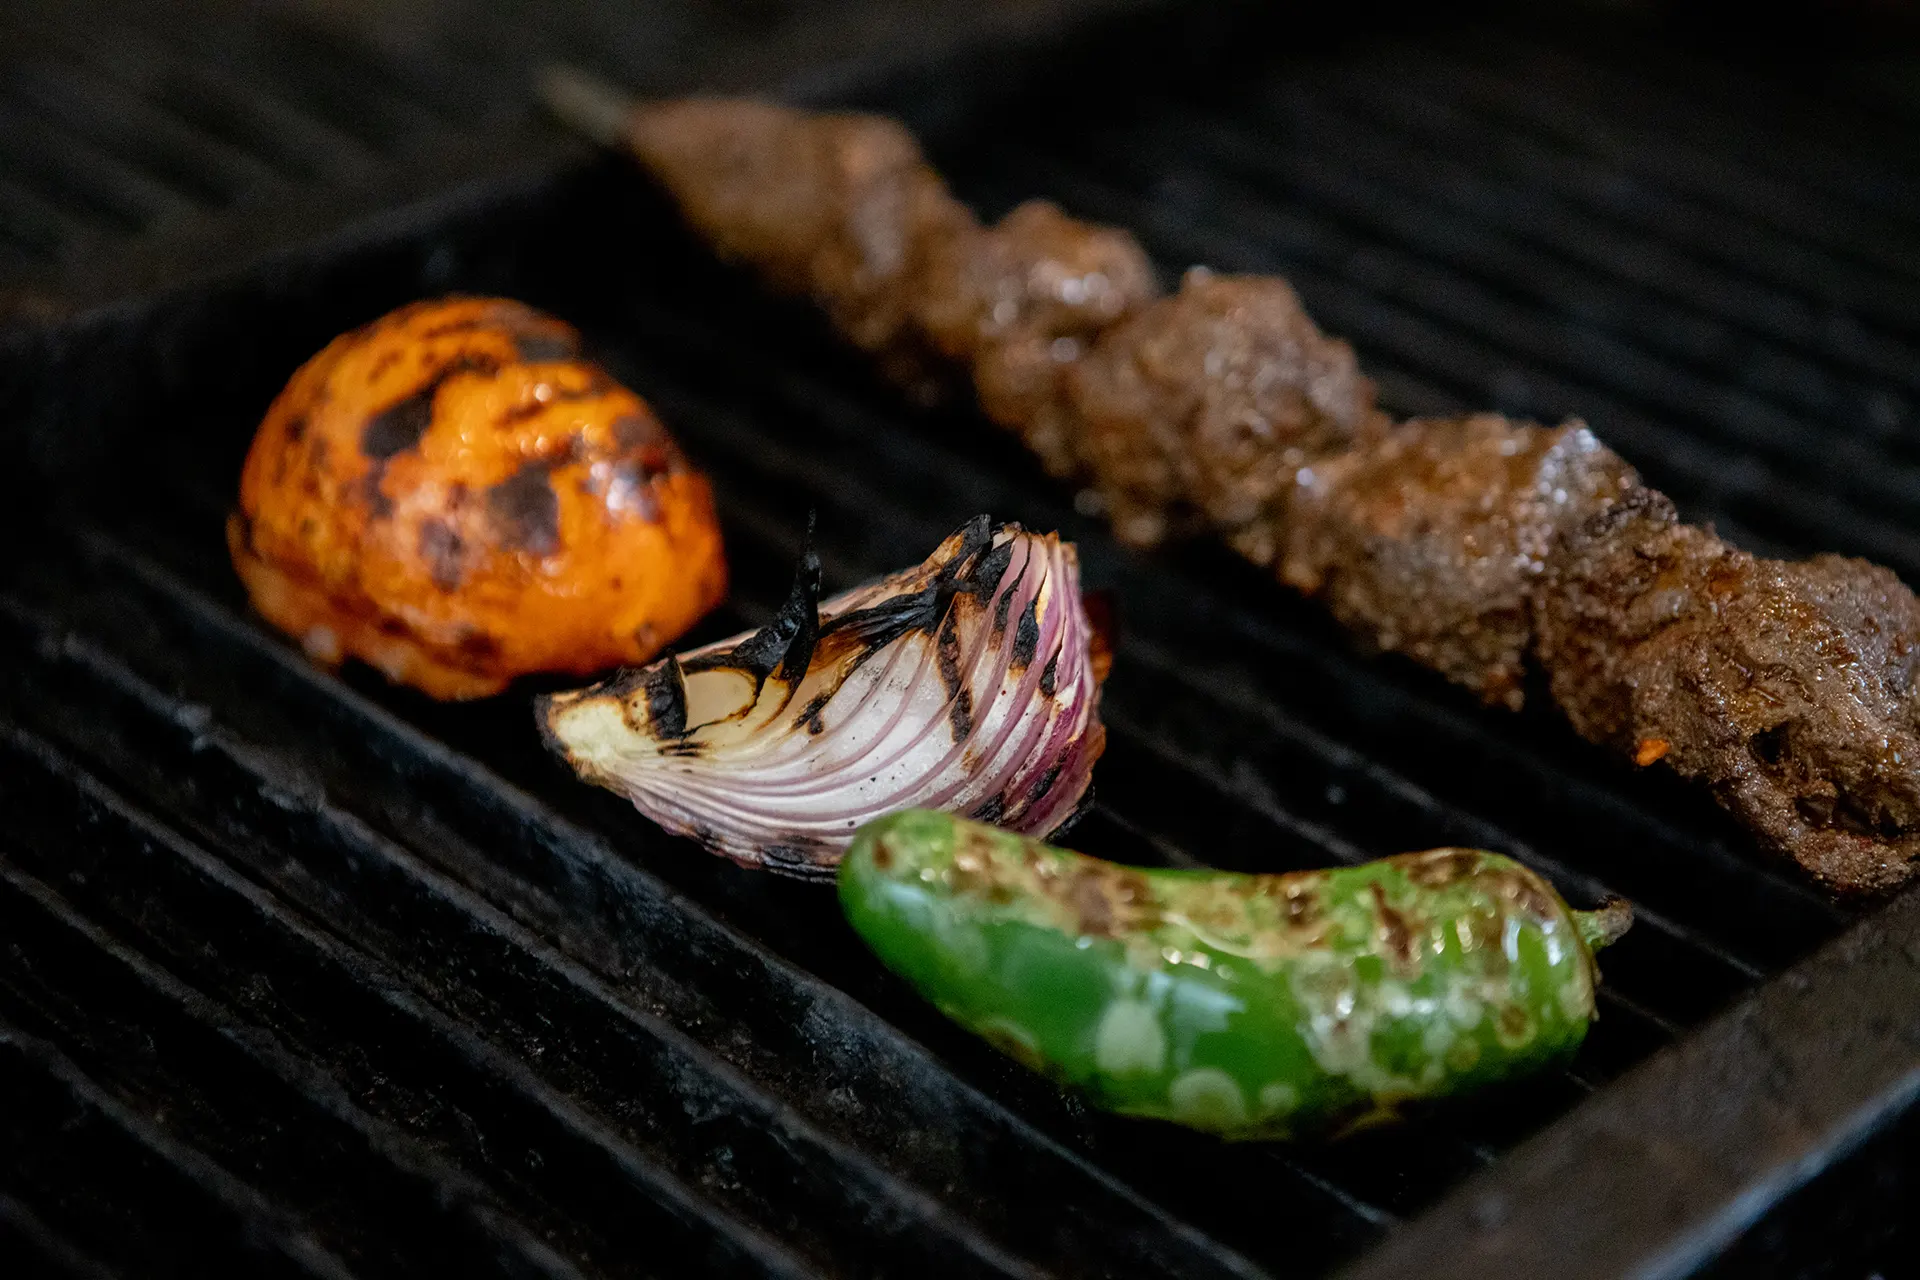 A Filet Mignon skewer, tomato, red onion, and jalapeño are placed on the grill in the hummus labs kitchen.